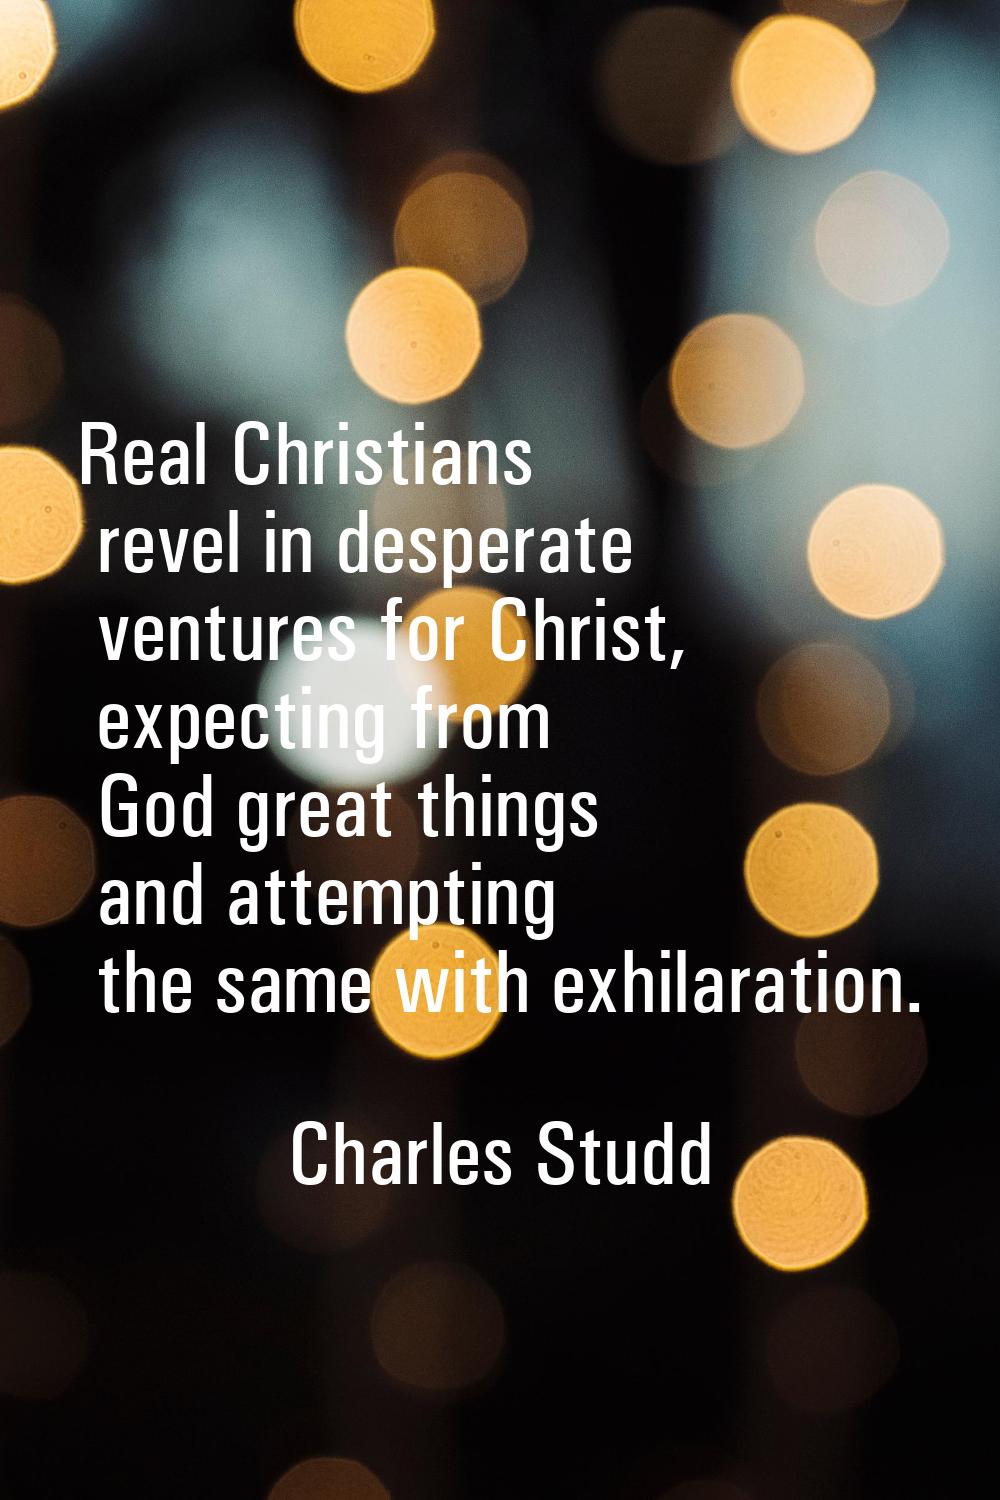 Real Christians revel in desperate ventures for Christ, expecting from God great things and attempt